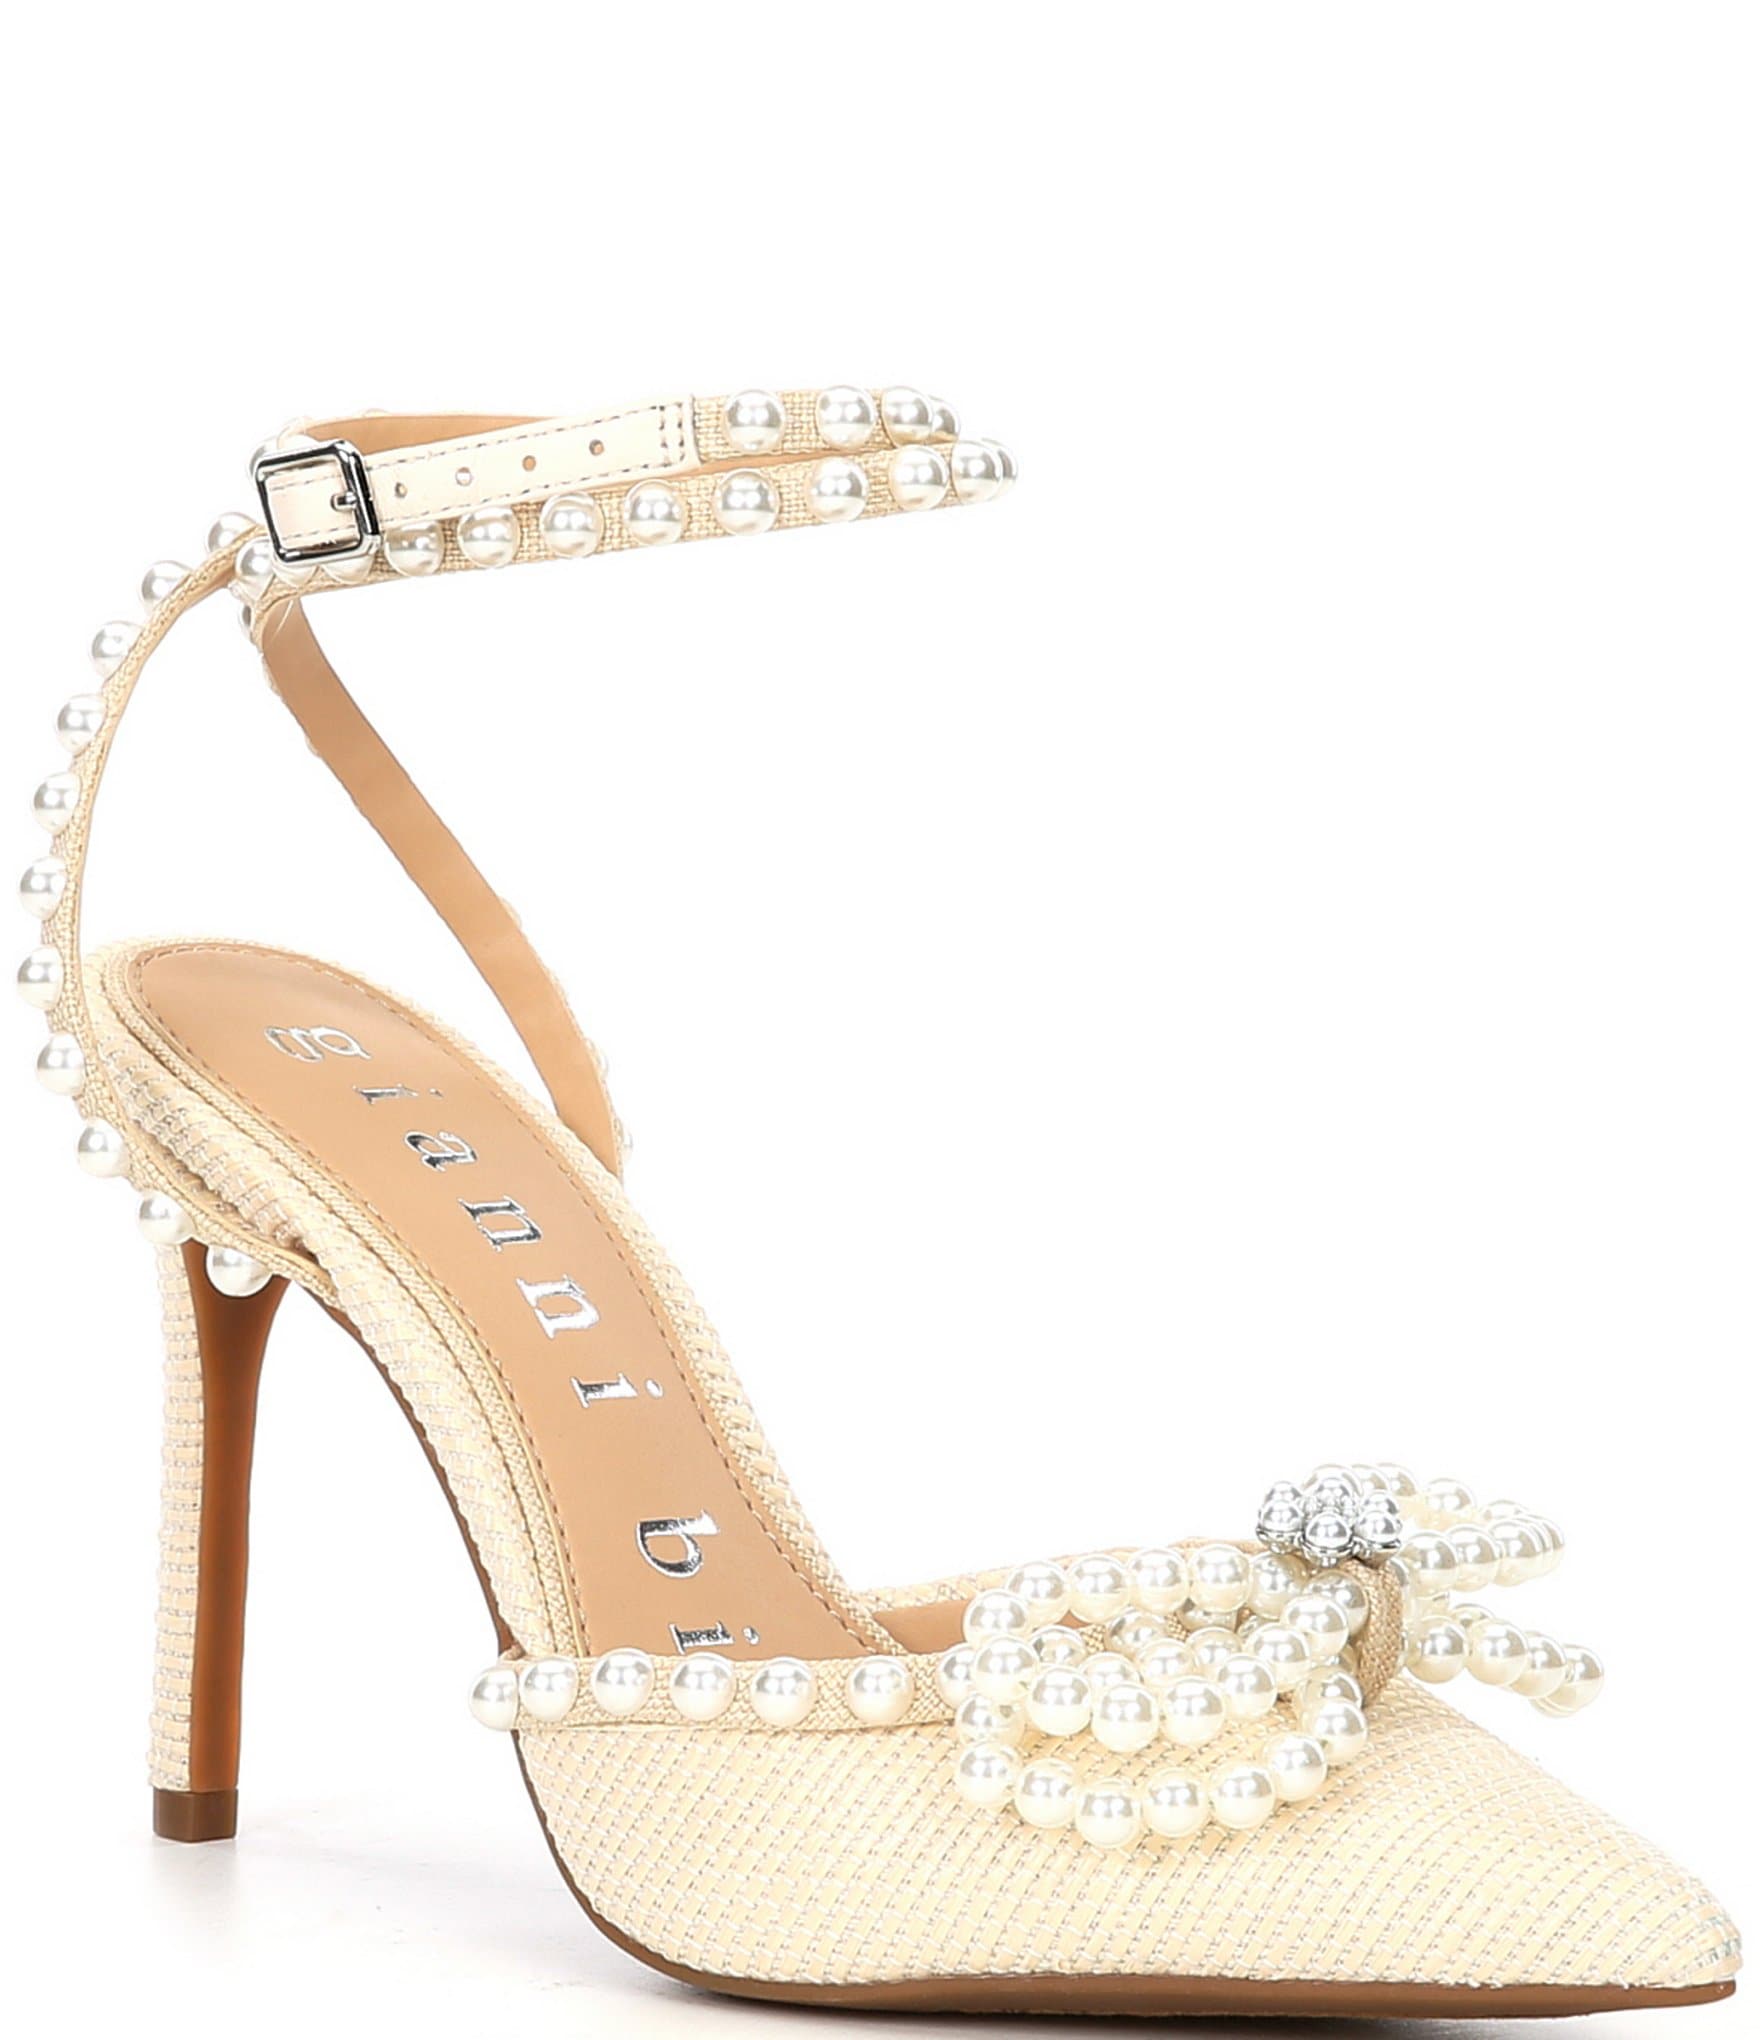 Gianni Bini TaylinnTwo Raffia Double Pearl Bow Pointed Toe Pumps ...